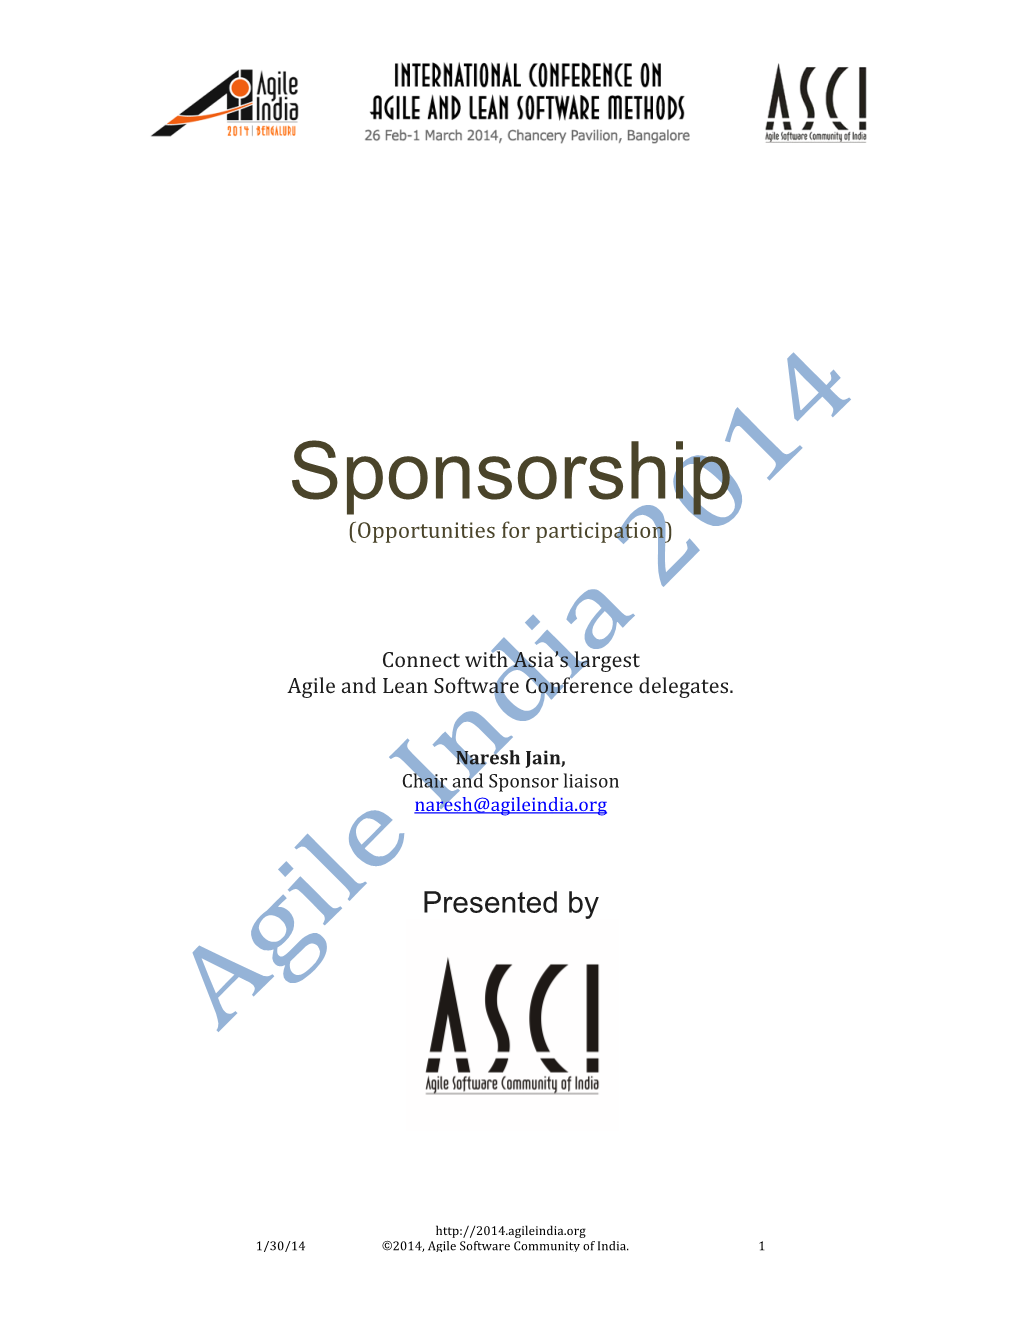 Sponsorship (Opportunities for Participation)